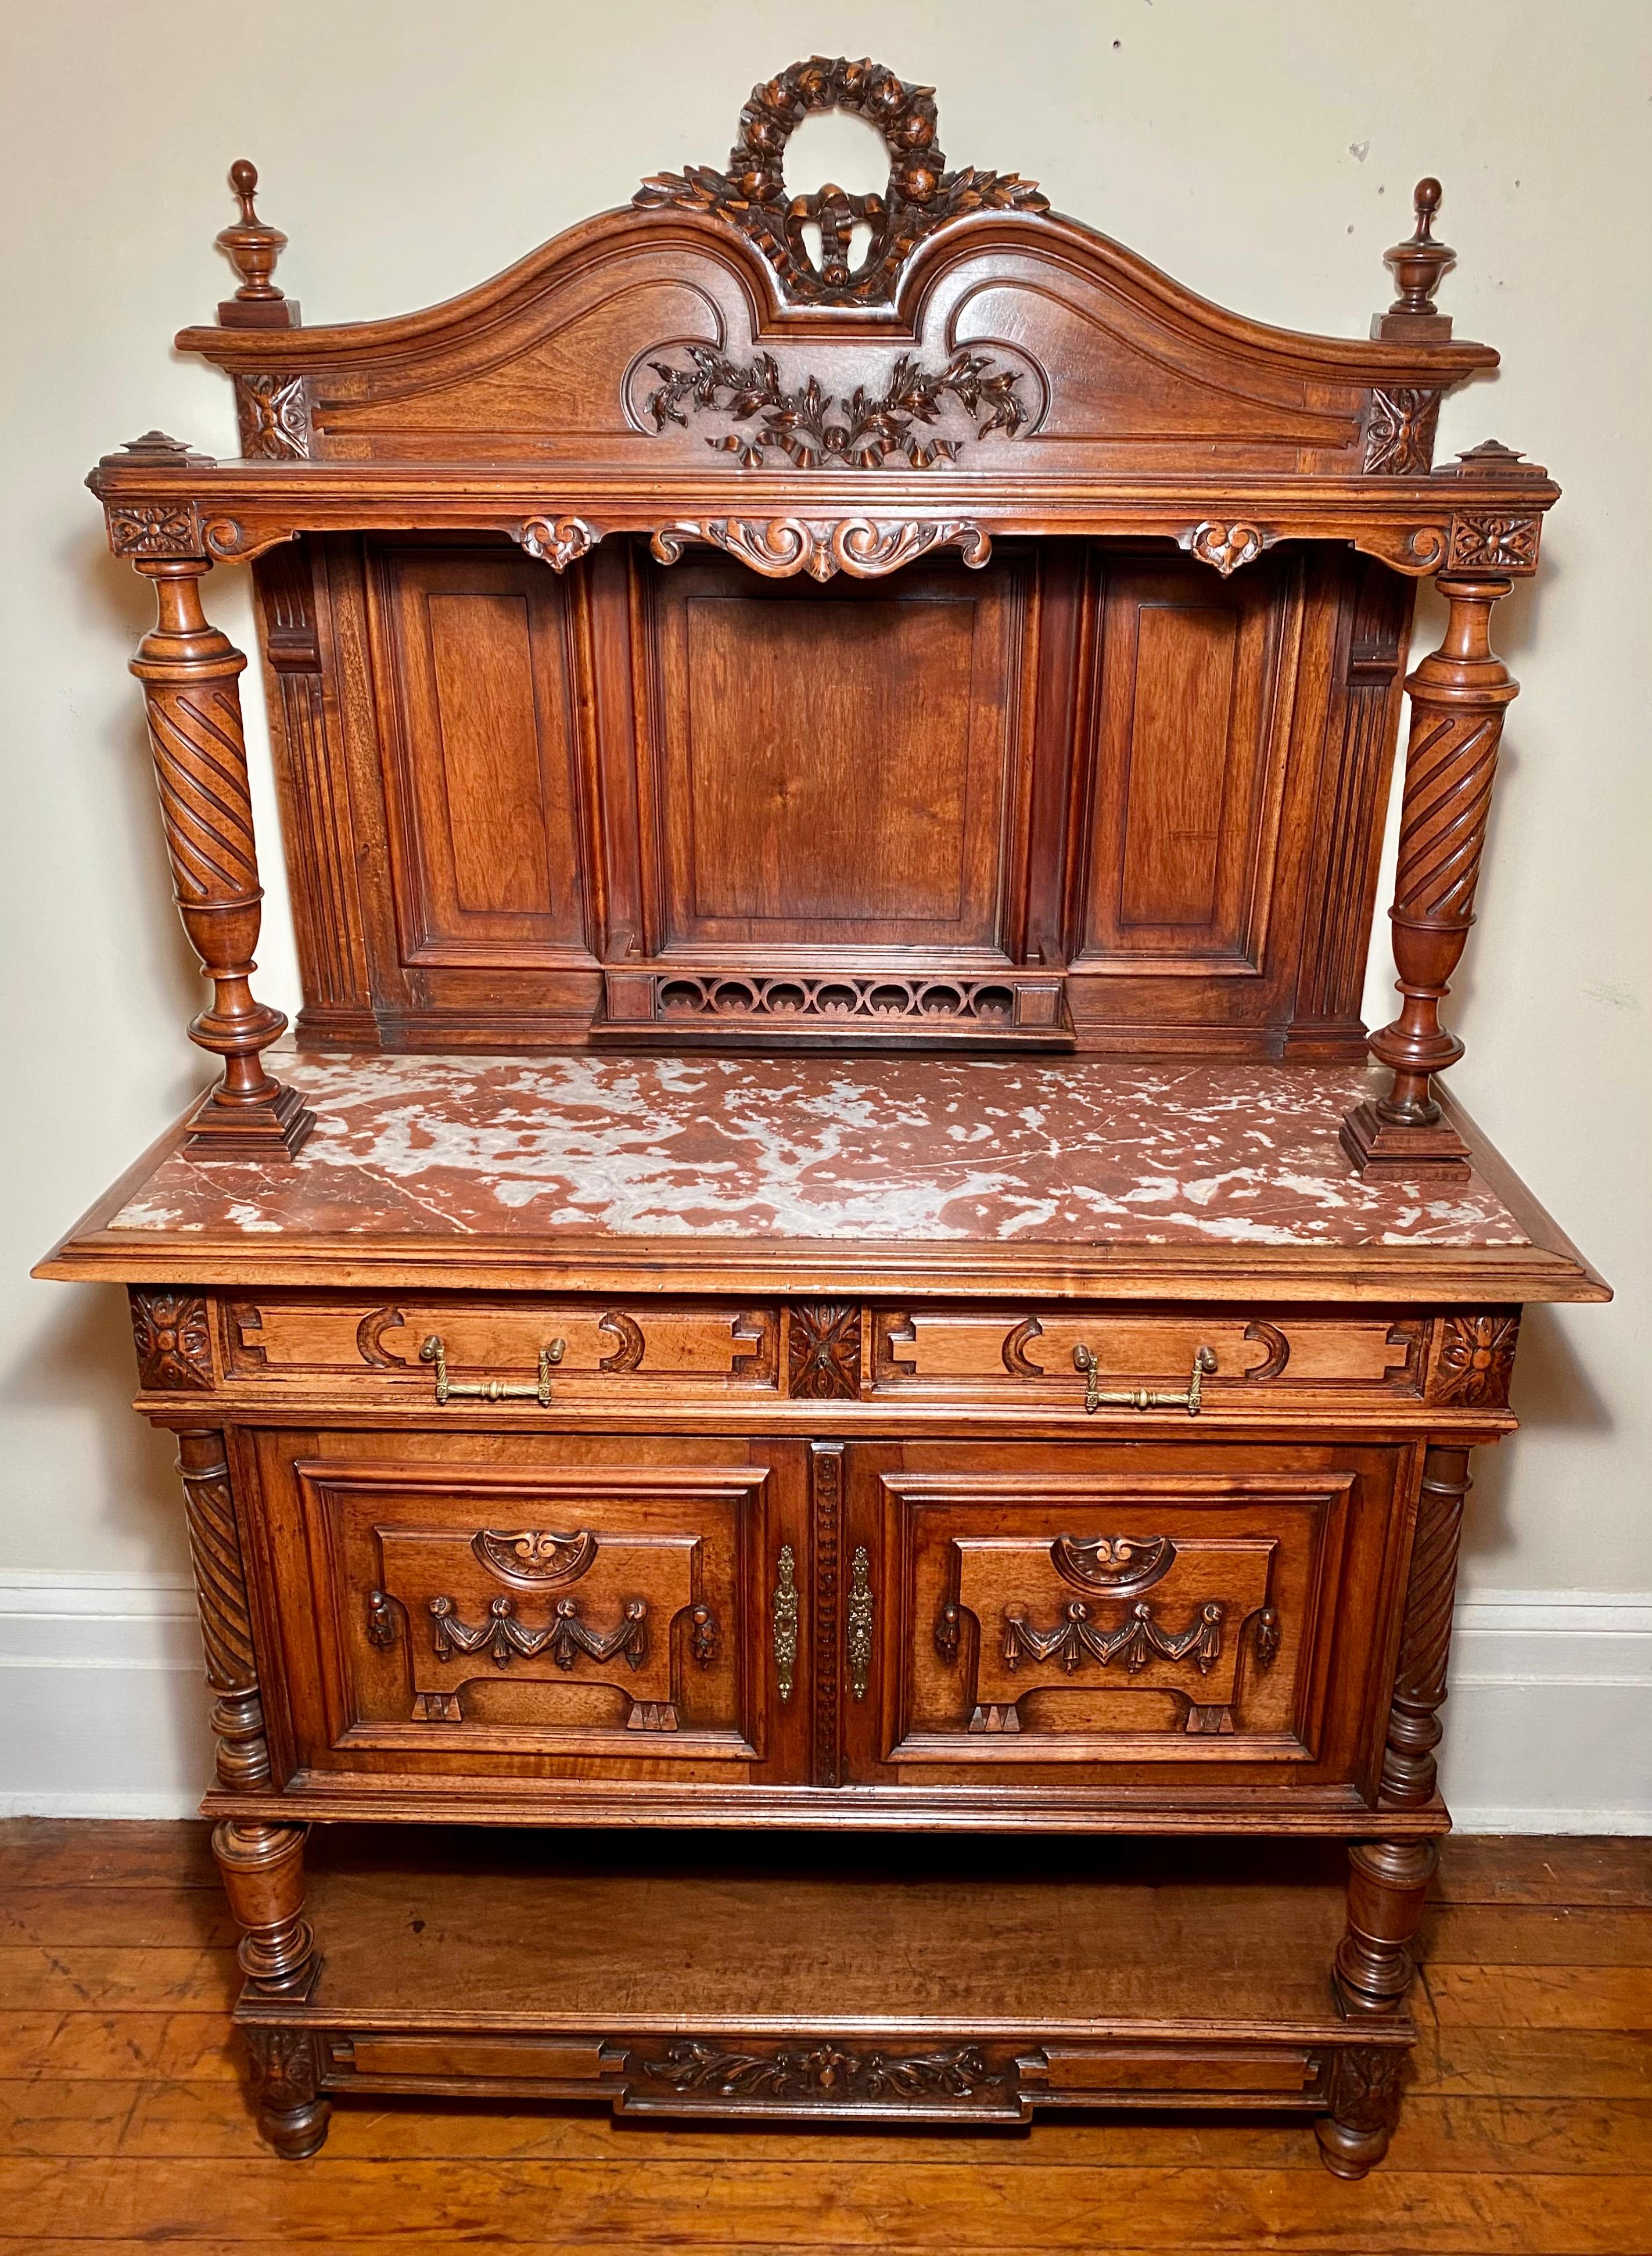 Antique French 19th century walnut server with marble top.